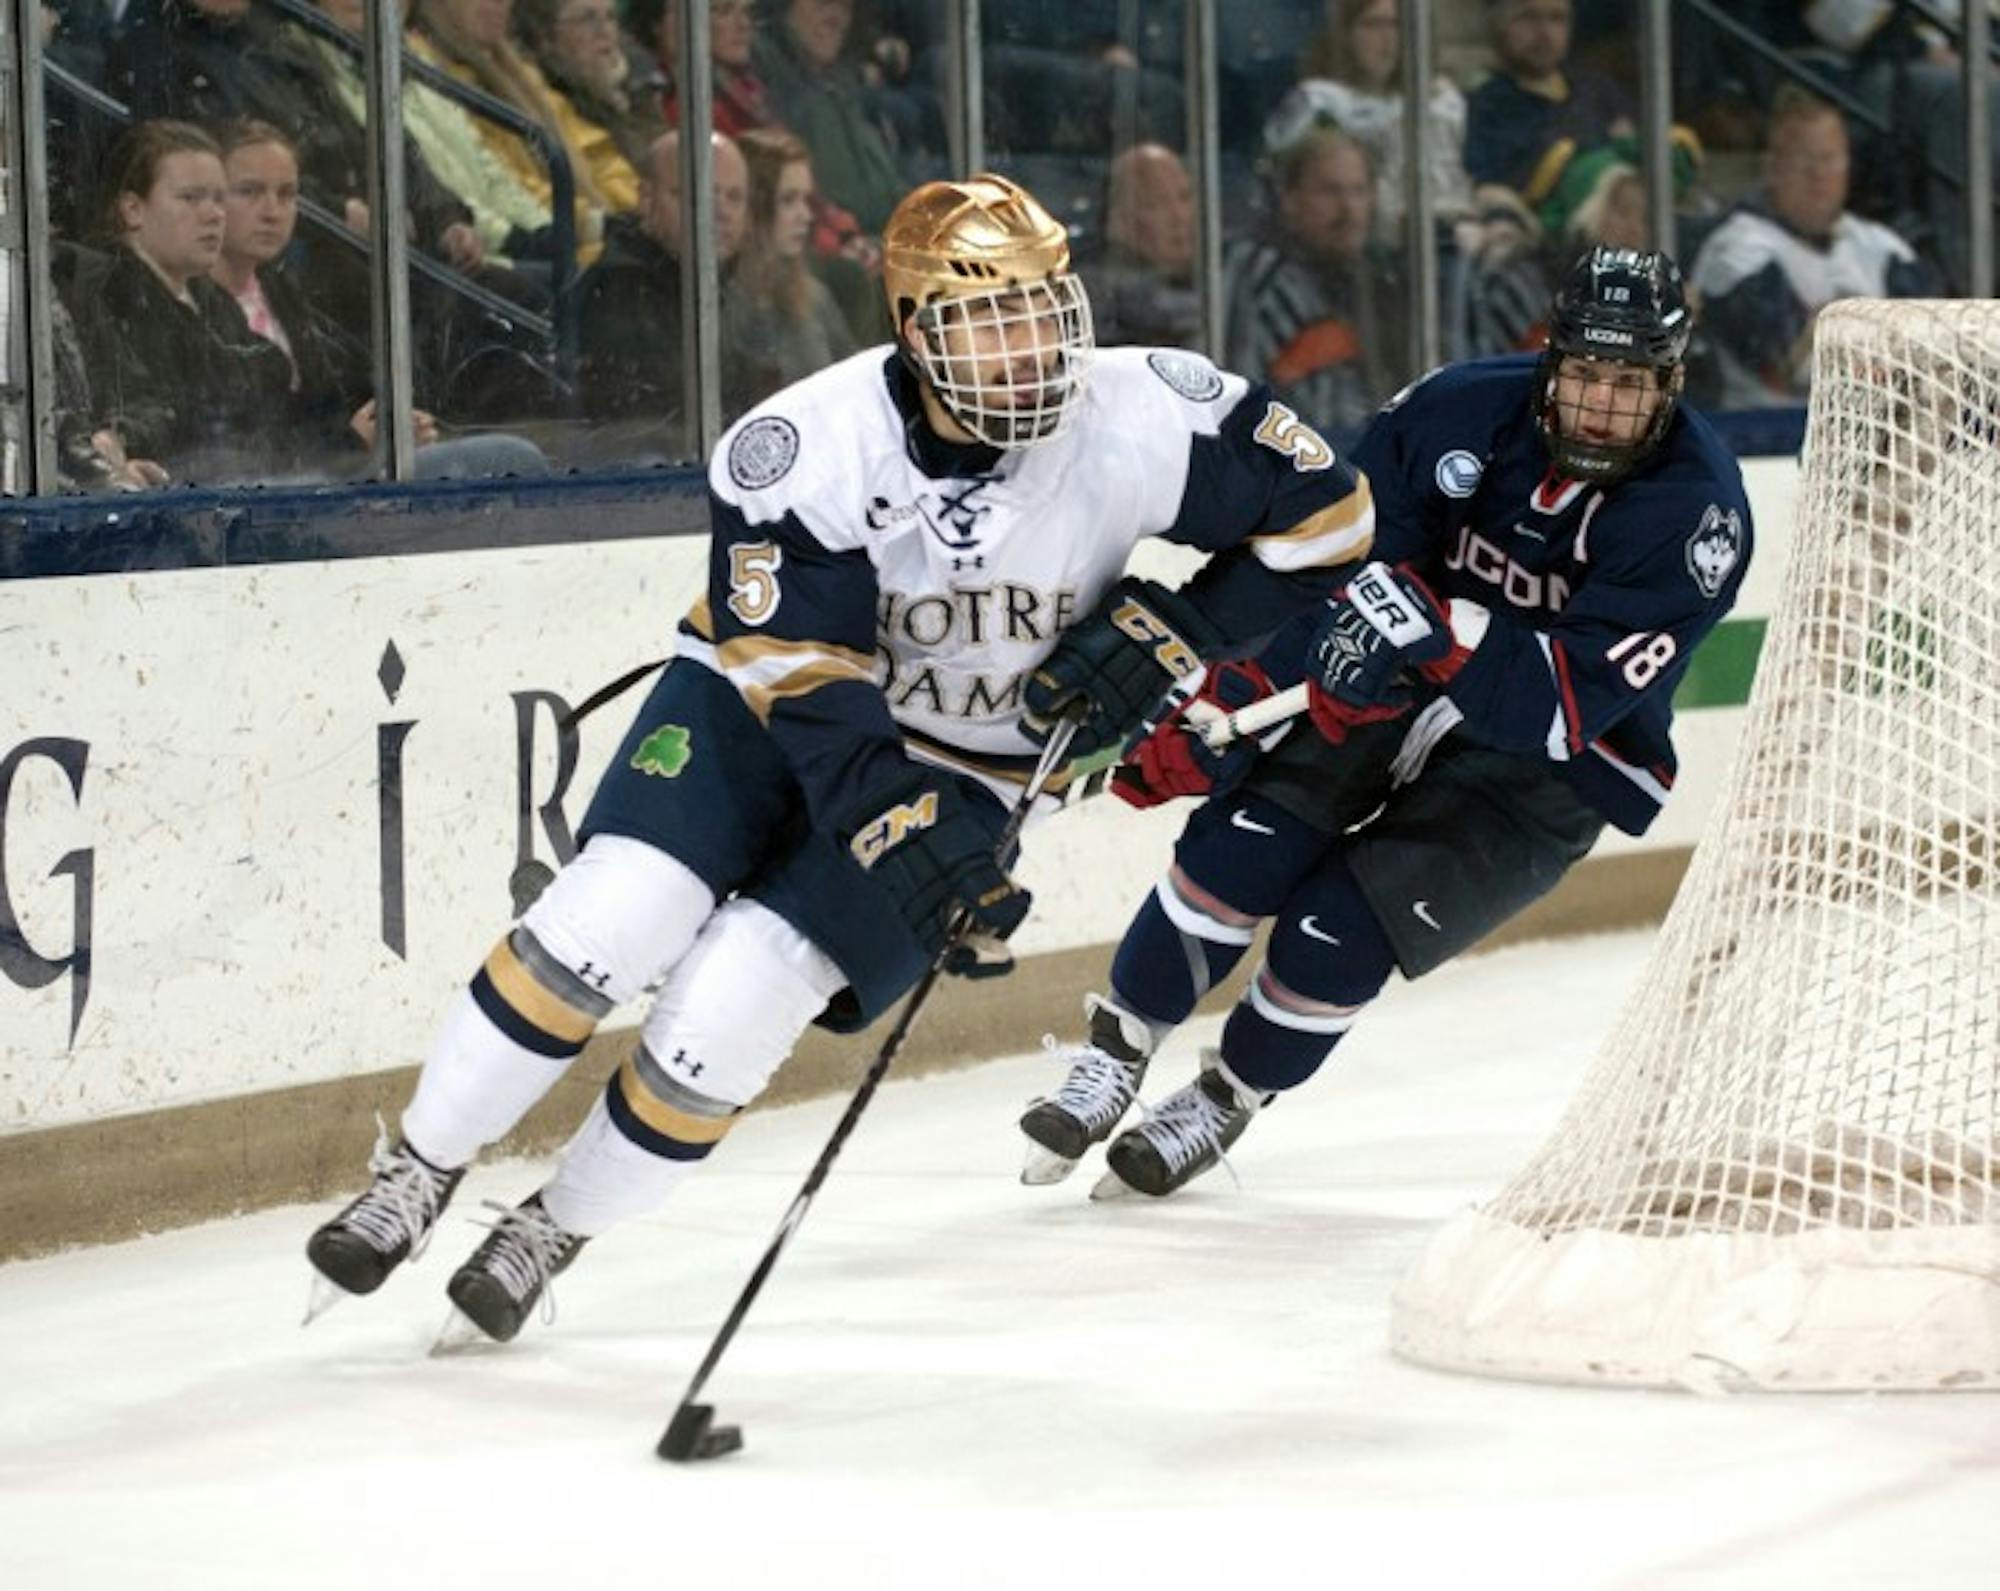 Irish senior defenseman Robbie Russo circles the net Jan. 16 against UConn at Compton Family Ice Arena. The two teams tied, 3-3.